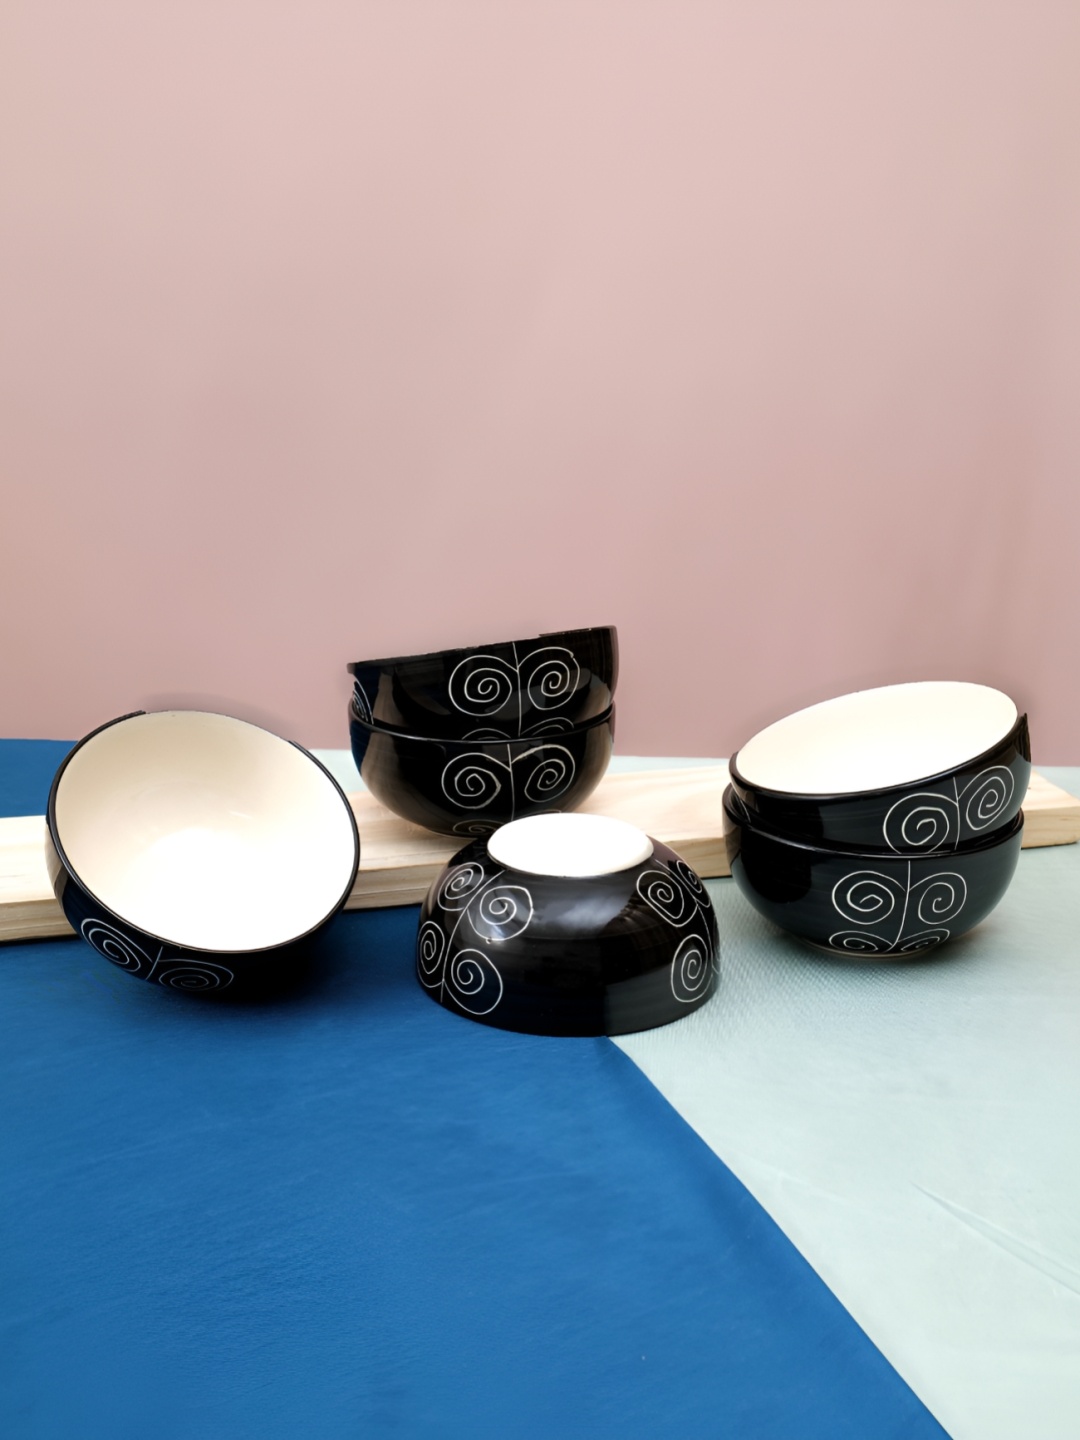 

ARTYSTA BEAUTIFYING LIVES Black & White 6 Pieces Printed Ceramic Glossy Bowls